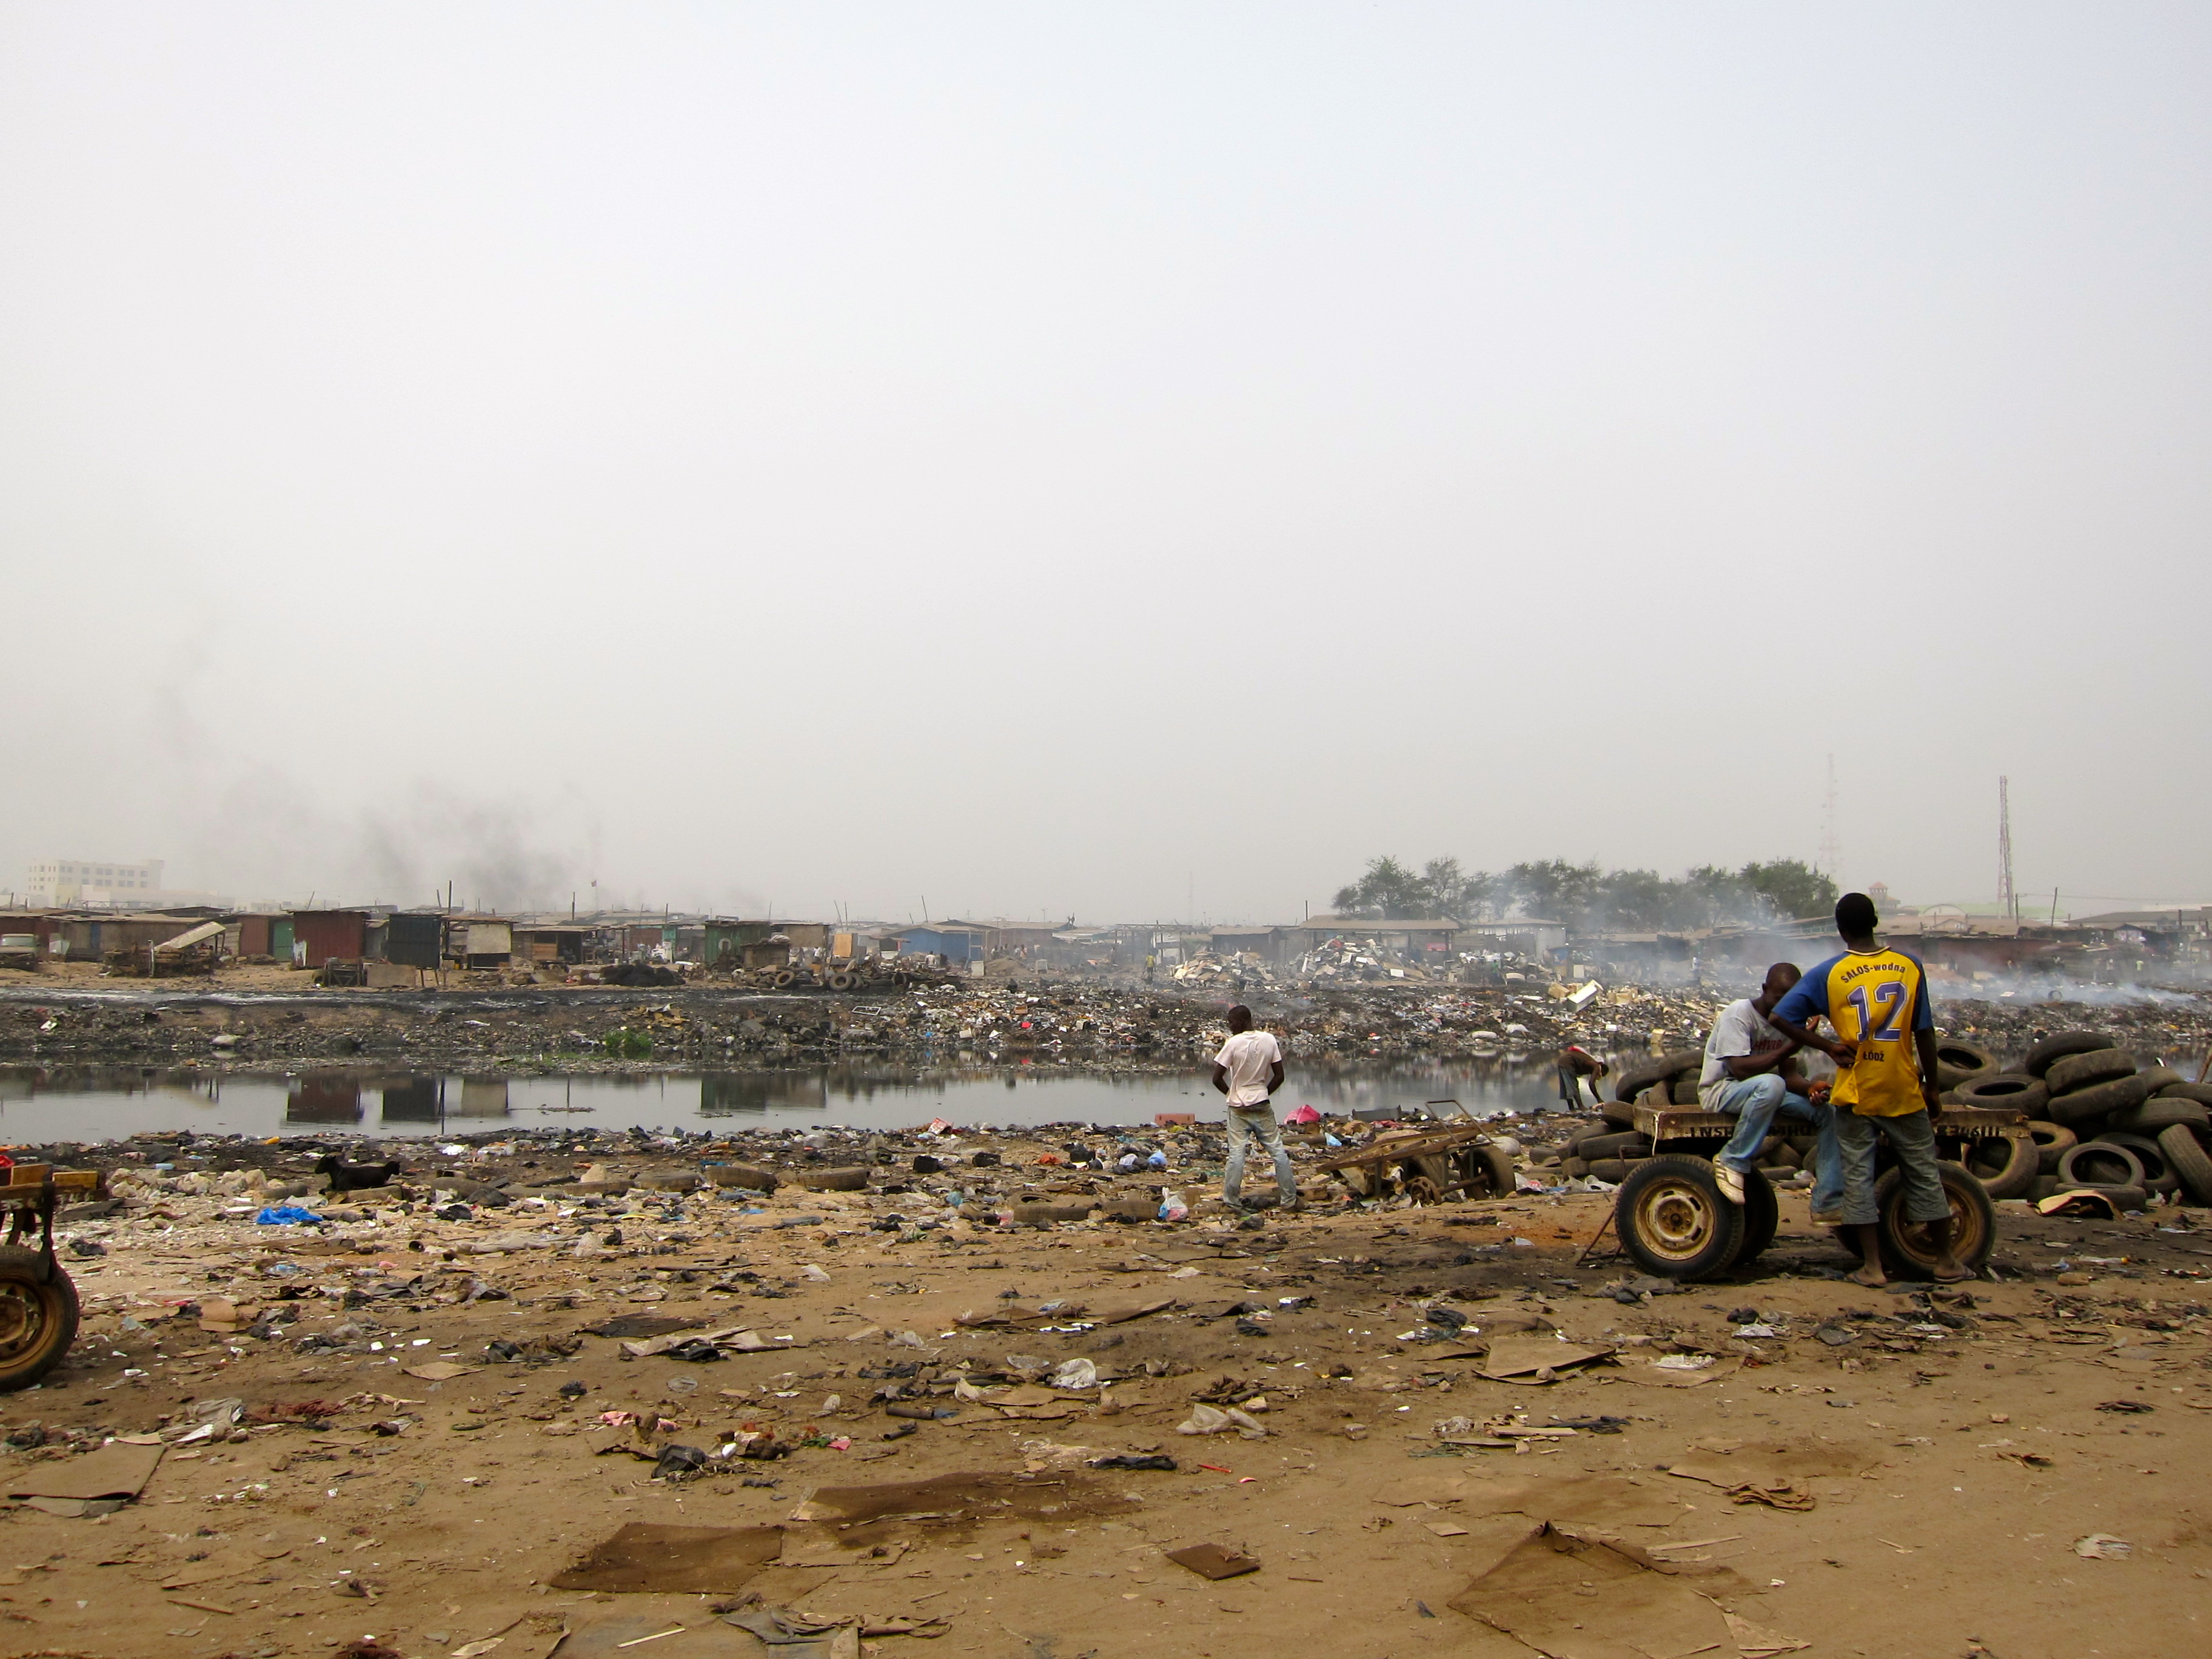 Polluted Korle Lagoon, Old Fadama by Slum Dwellers International via flickr, CC BY 2.0. This picture shows some of the environmental challenges faced by Old Fadama. However, it does not show a justification to forcefully evict residents – rather, it would be worthwile to encourage them to partipate in cleaning efforts.